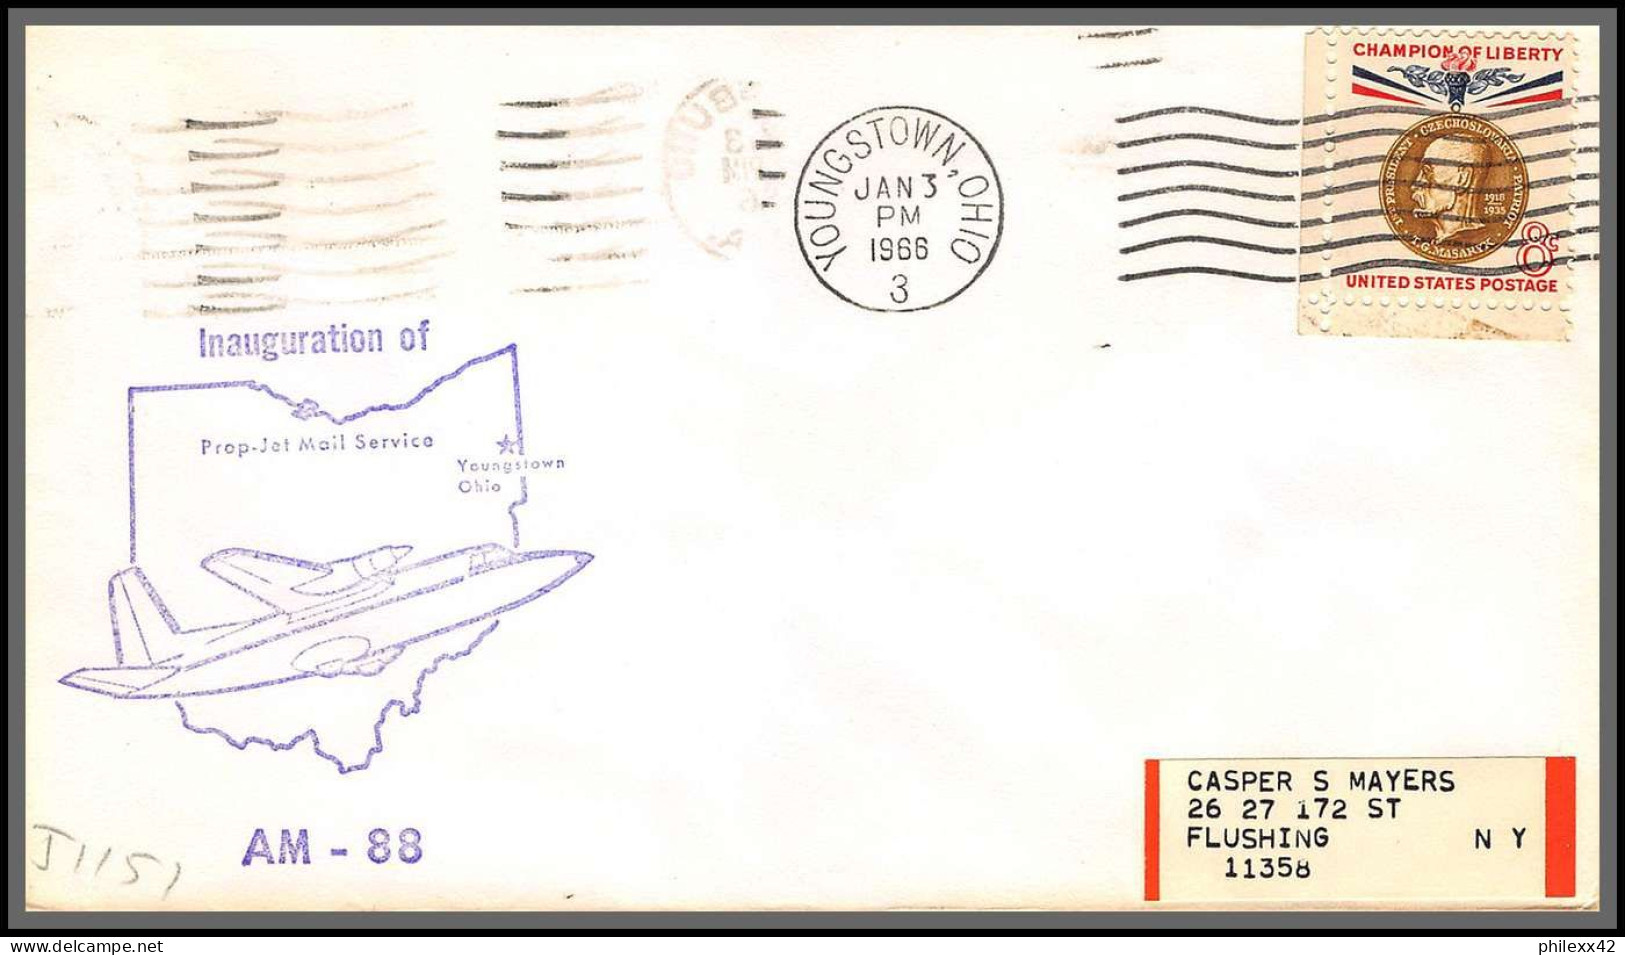 12437 Am 88 Inauguration Prop Jet Mail Service Youngstown 3/1/1966 Premier Vol First Flight Lettre Airmail Cover Usa  - 3c. 1961-... Brieven